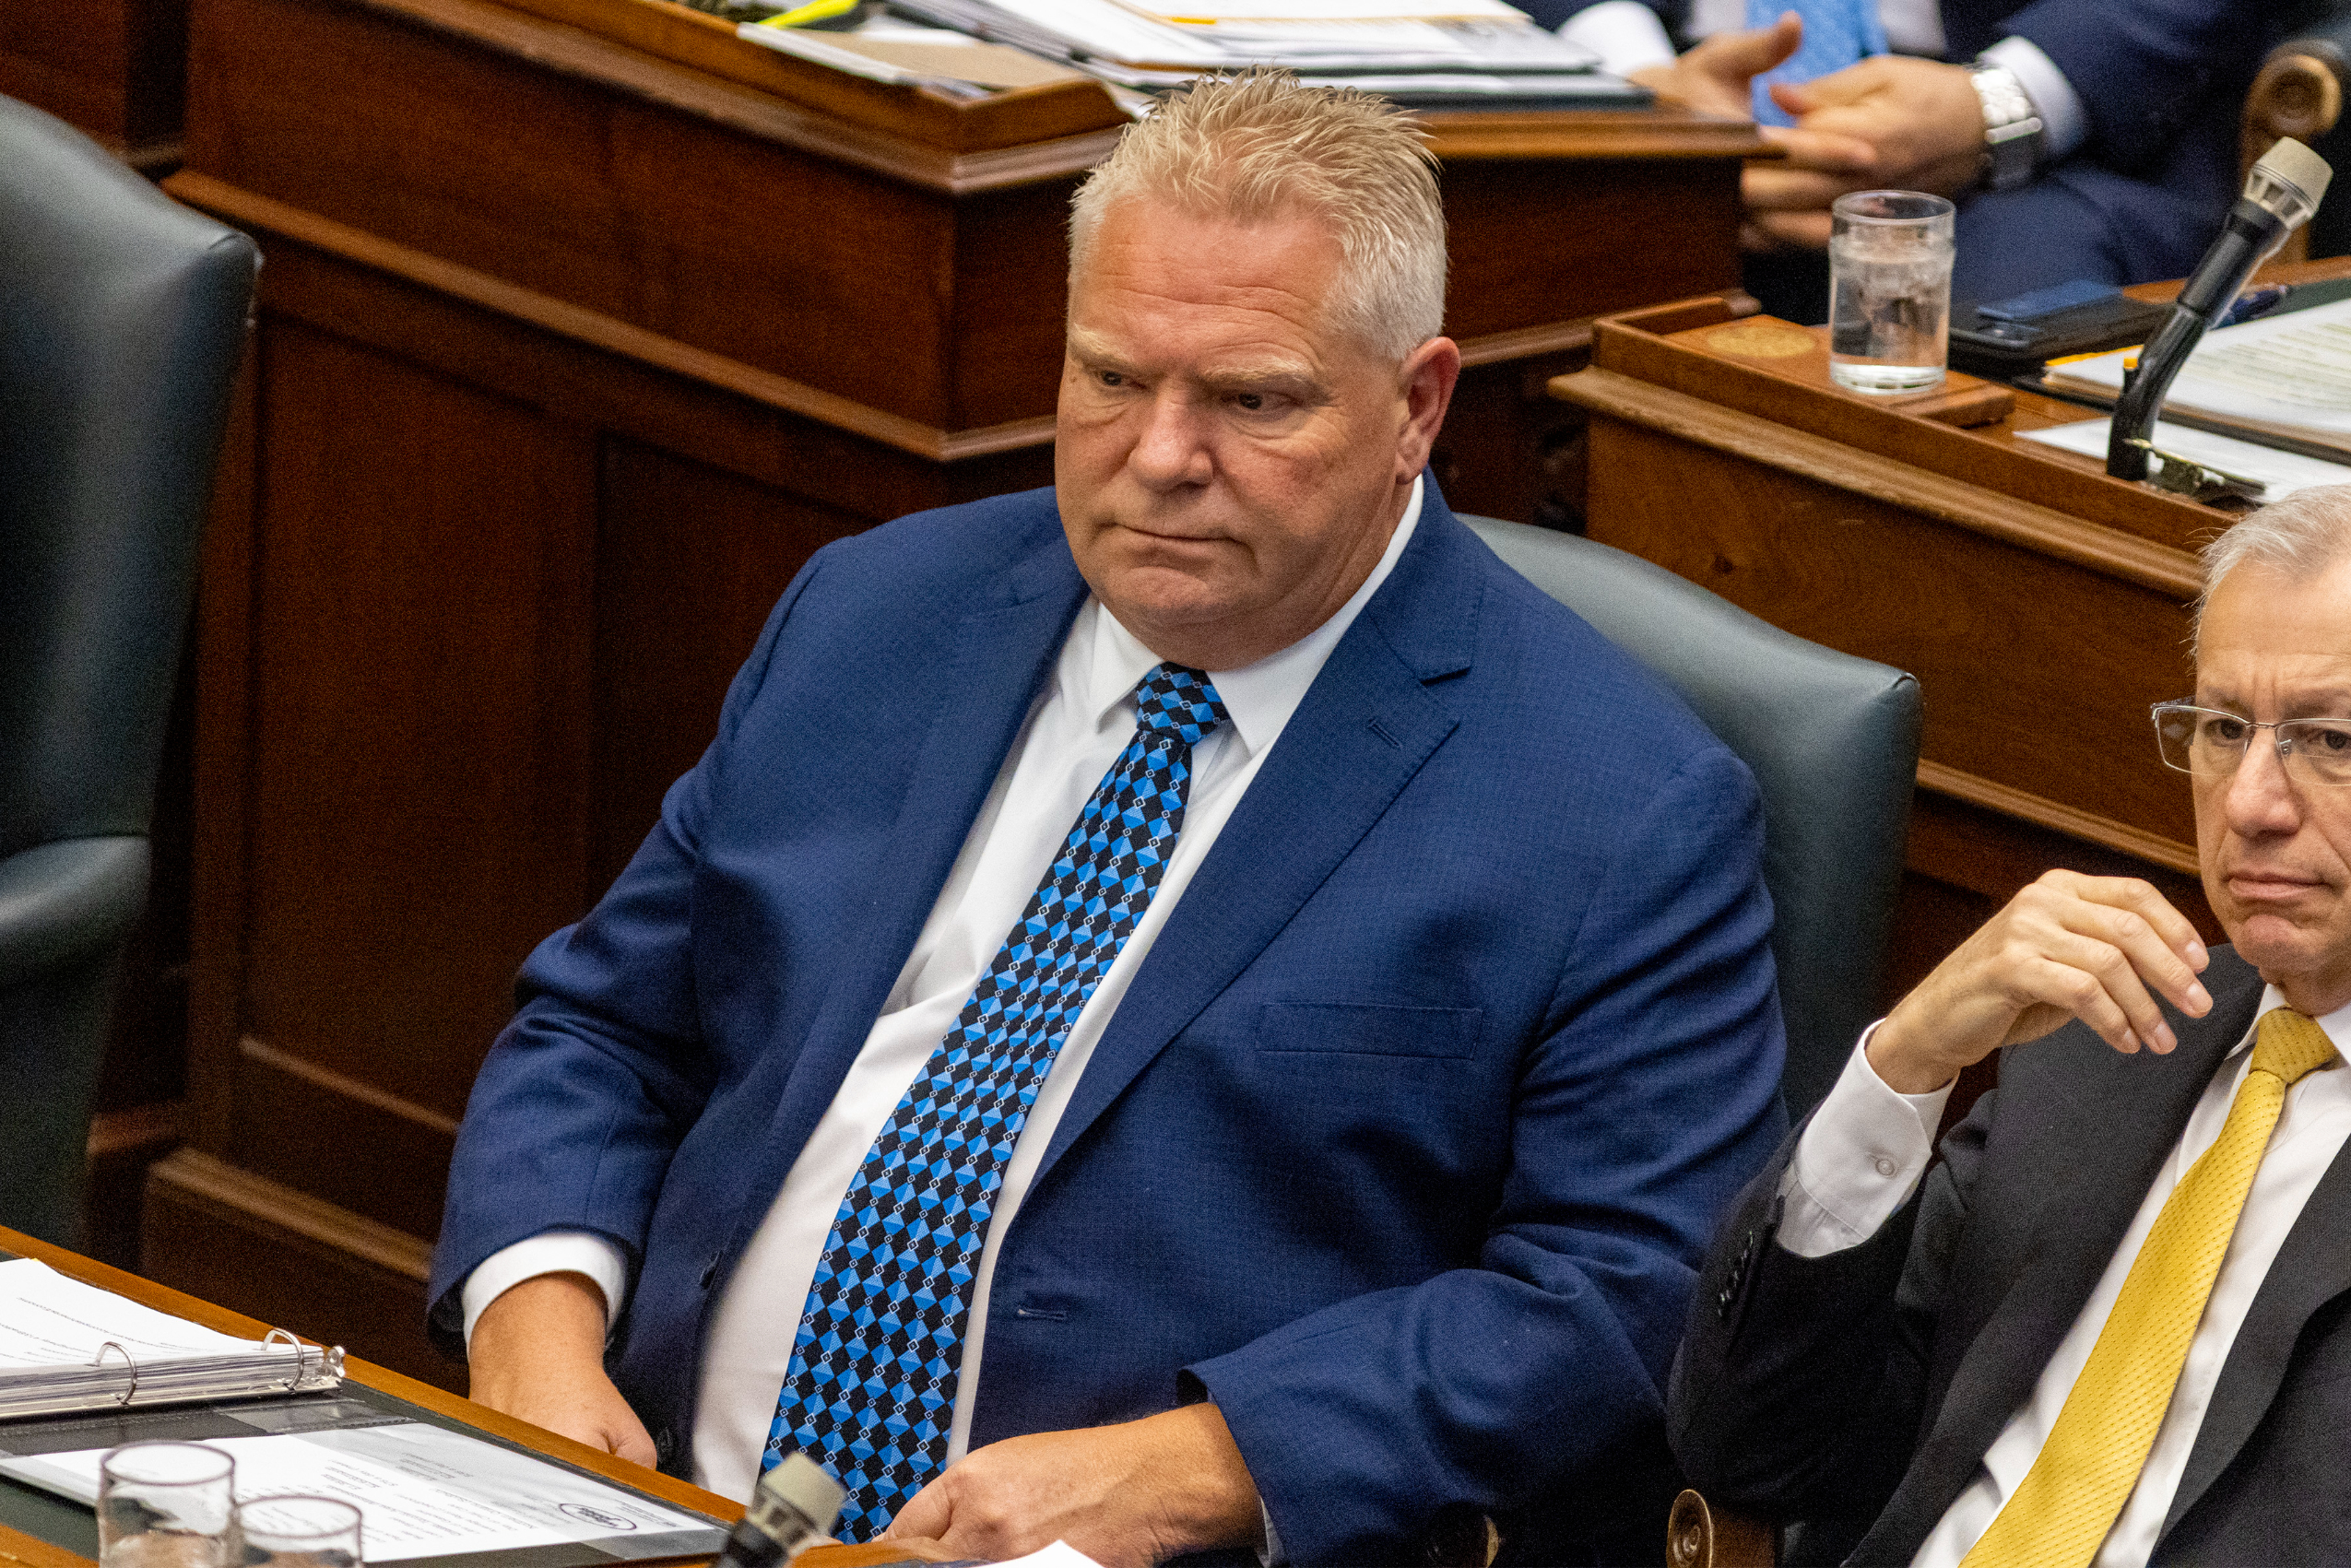 Ontario Premier Doug Ford stares straight ahead inside Queen's Park